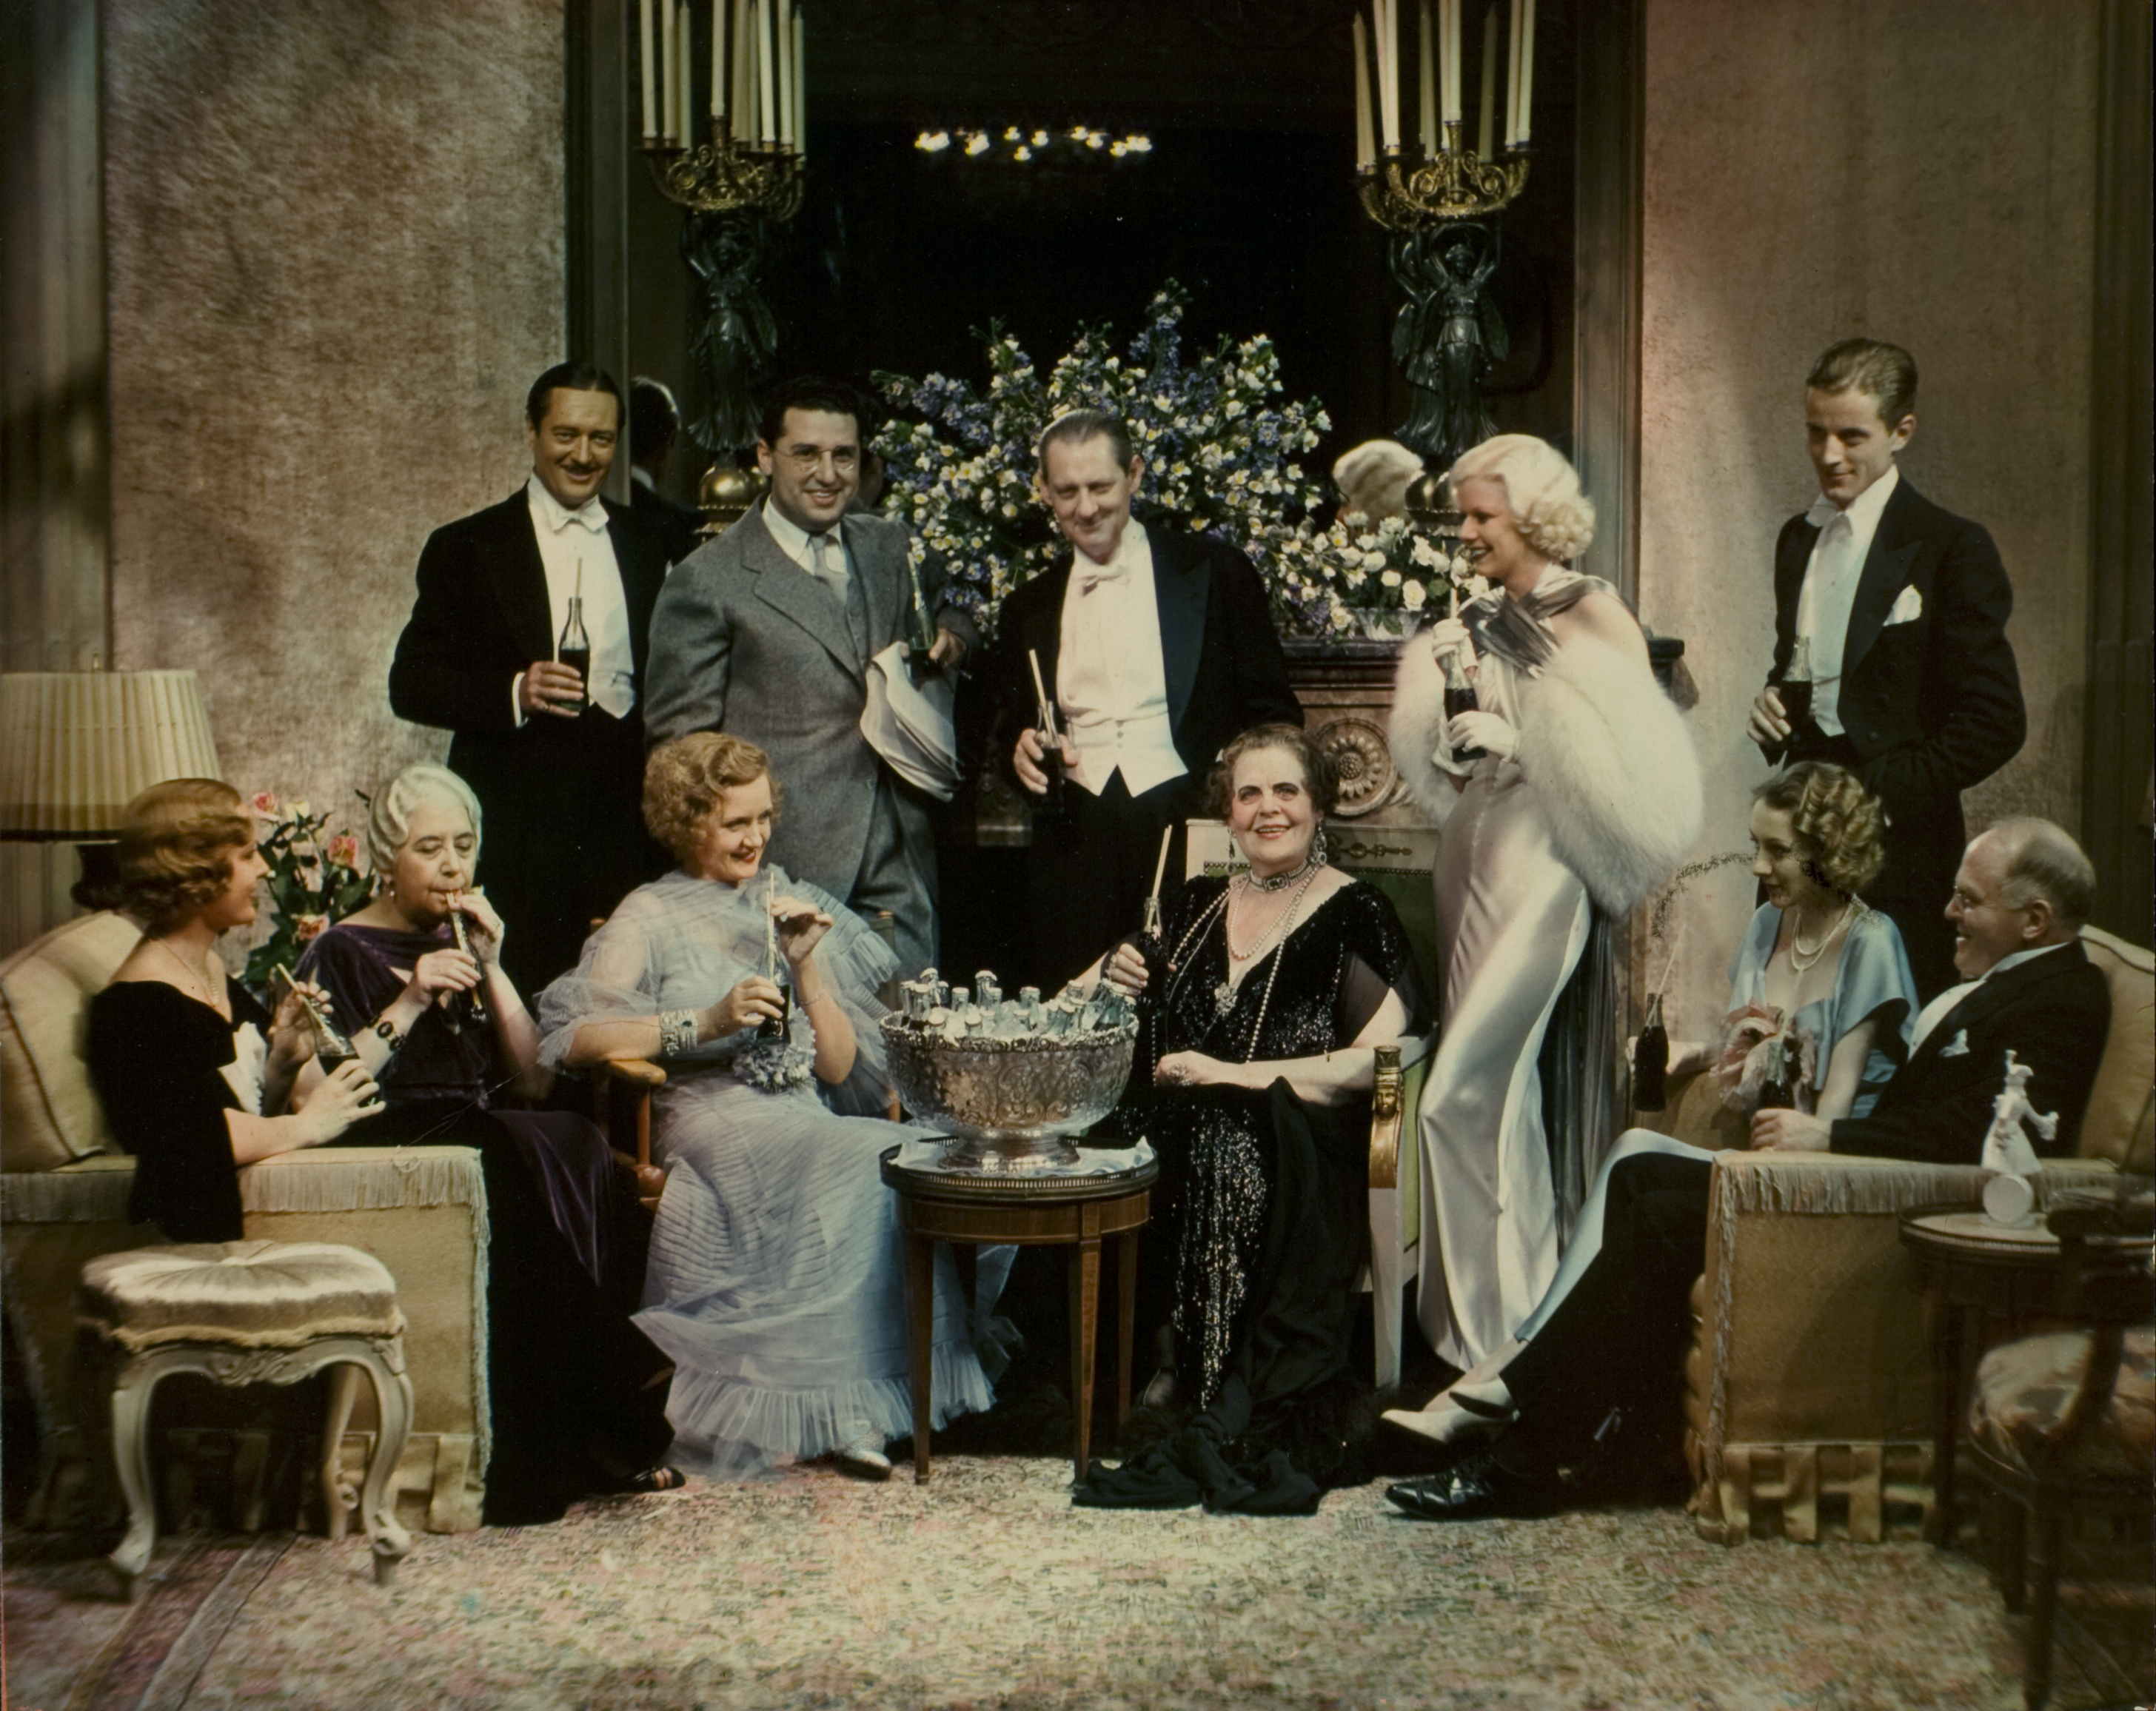 Still of John Barrymore, Lionel Barrymore, Wallace Beery, Billie Burke, Jean Harlow, Marie Dressler, Madge Evans, Edmund Lowe and Lee Tracy in Dinner at Eight (1933)